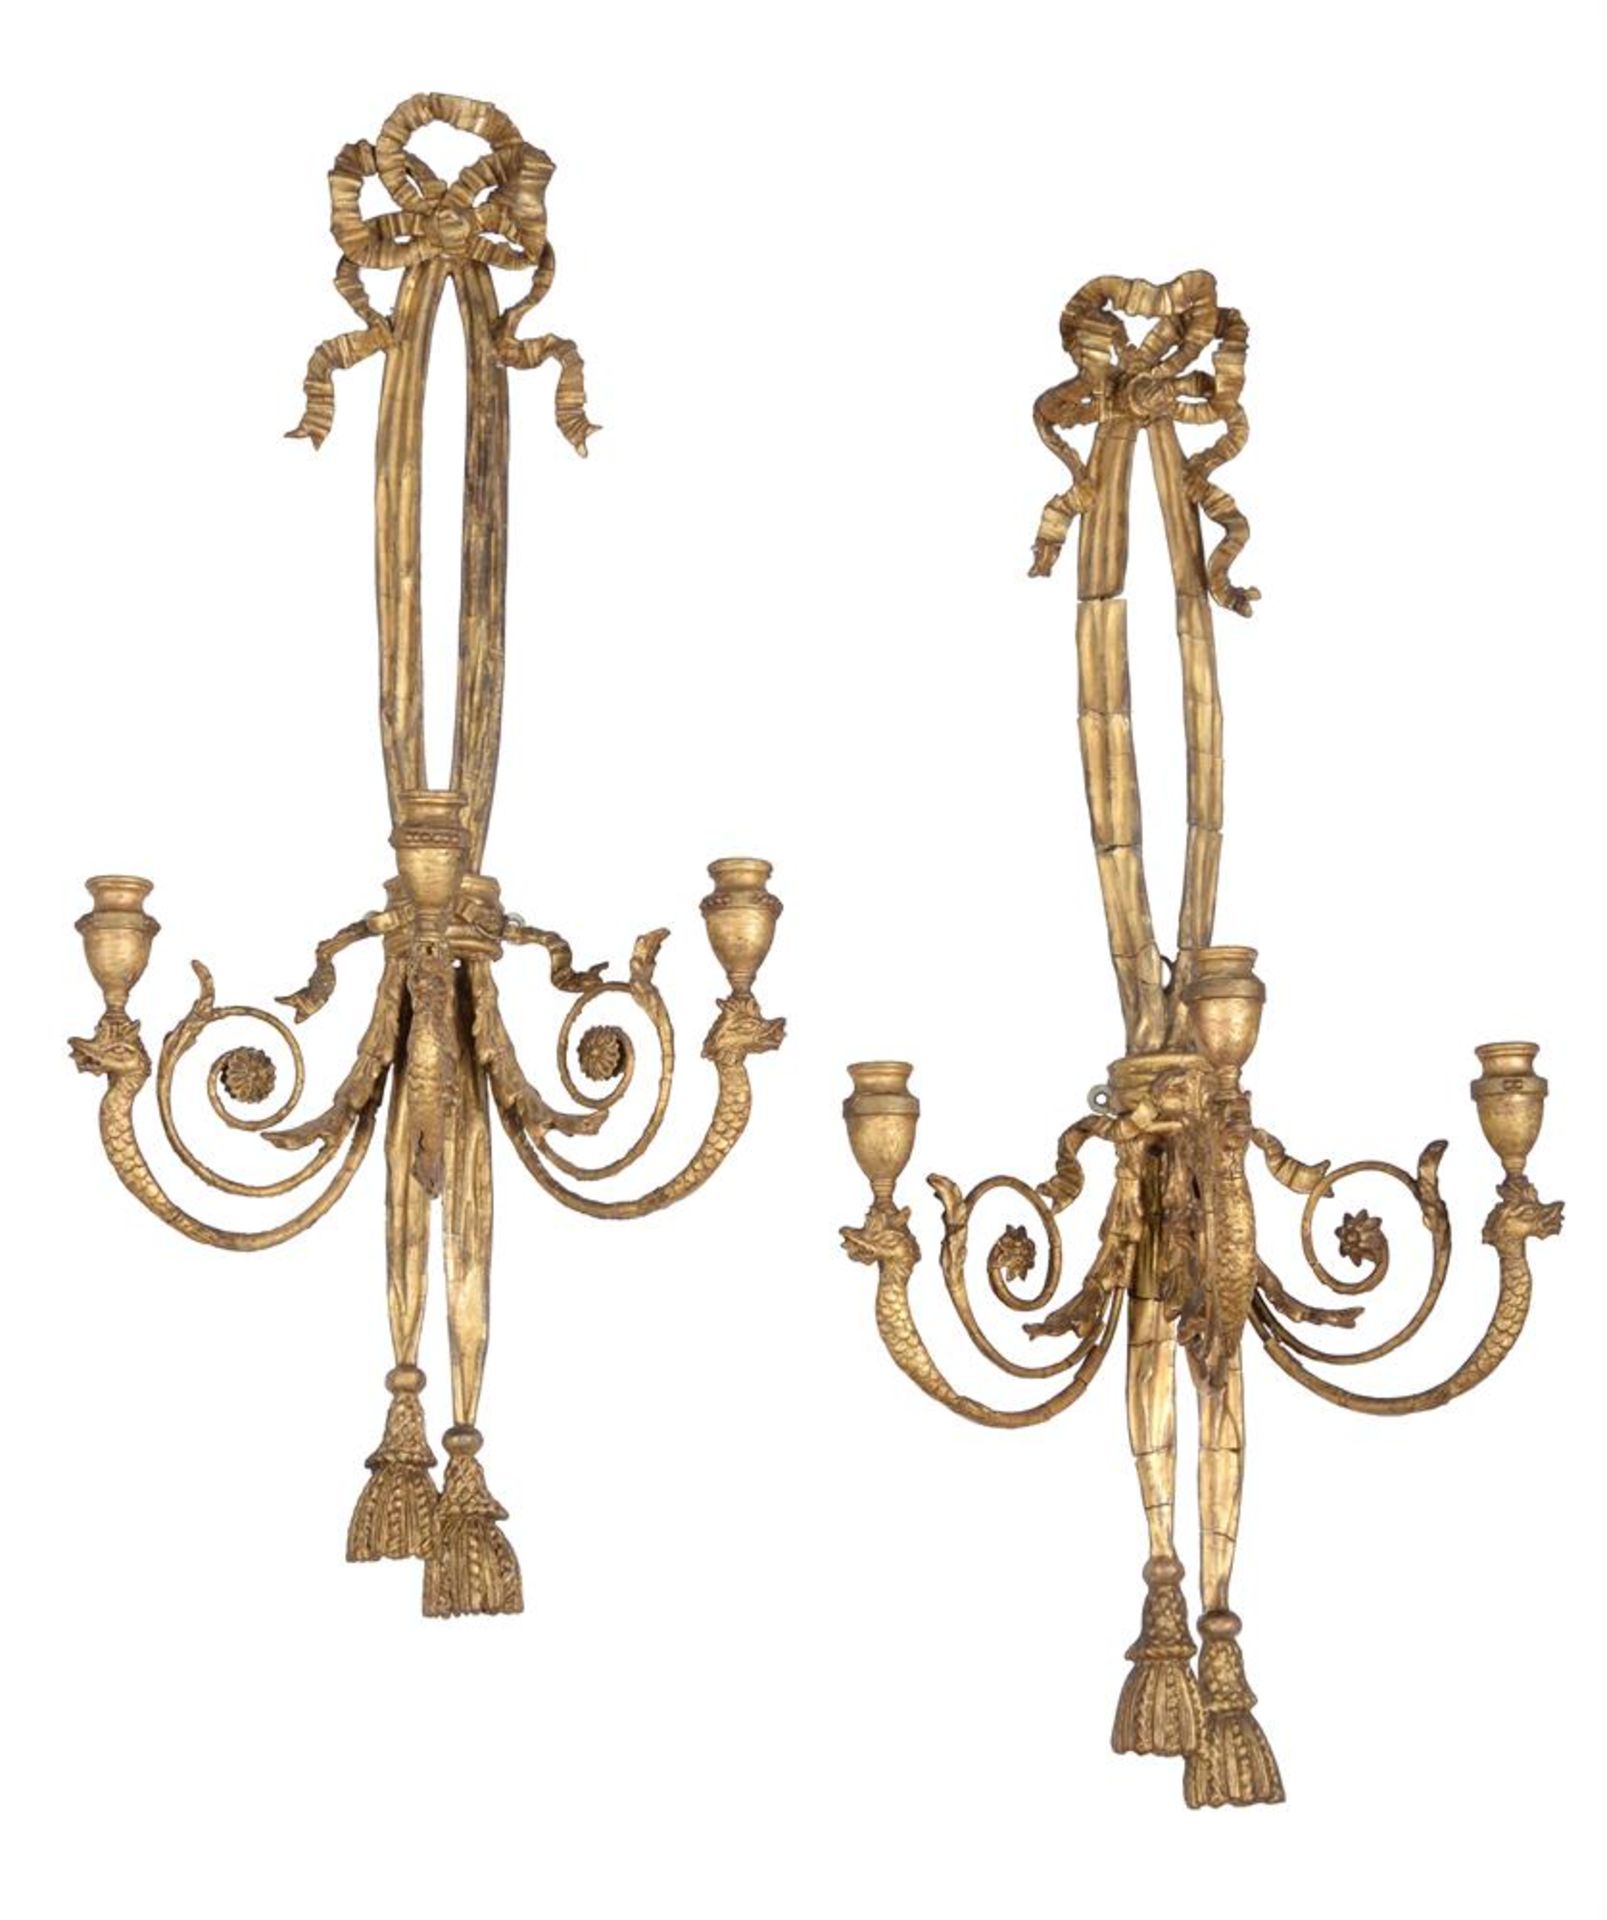 A PAIR OF GEORGE III GILT GESSO THREE-BRANCH WALL LIGHTS, EARLY 19TH CENTURY - Image 2 of 3